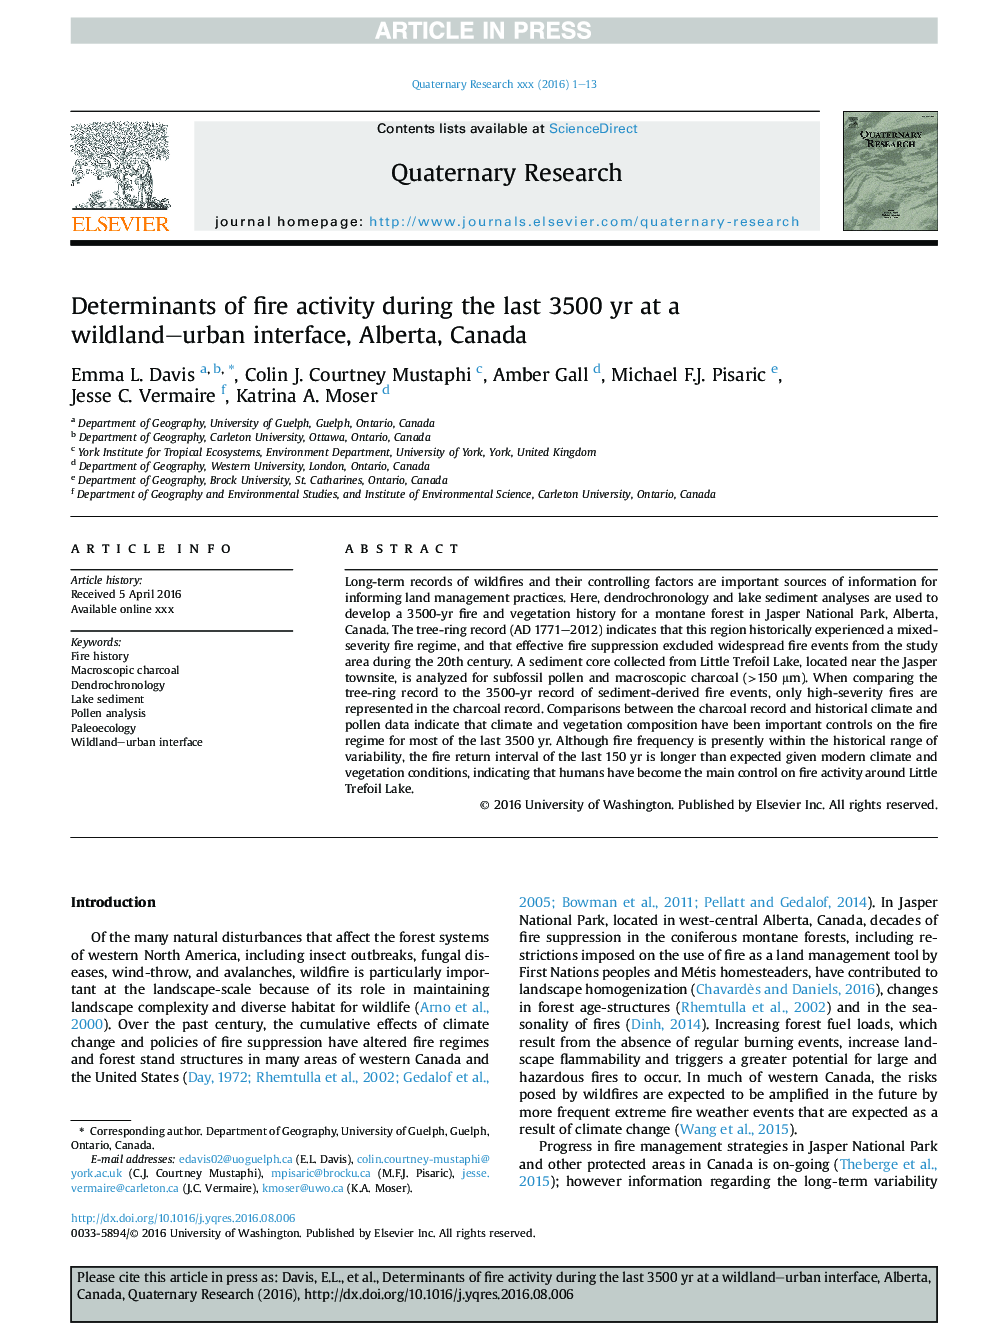 Determinants of fire activity during the last 3500Â yrÂ at a wildland-urban interface, Alberta, Canada